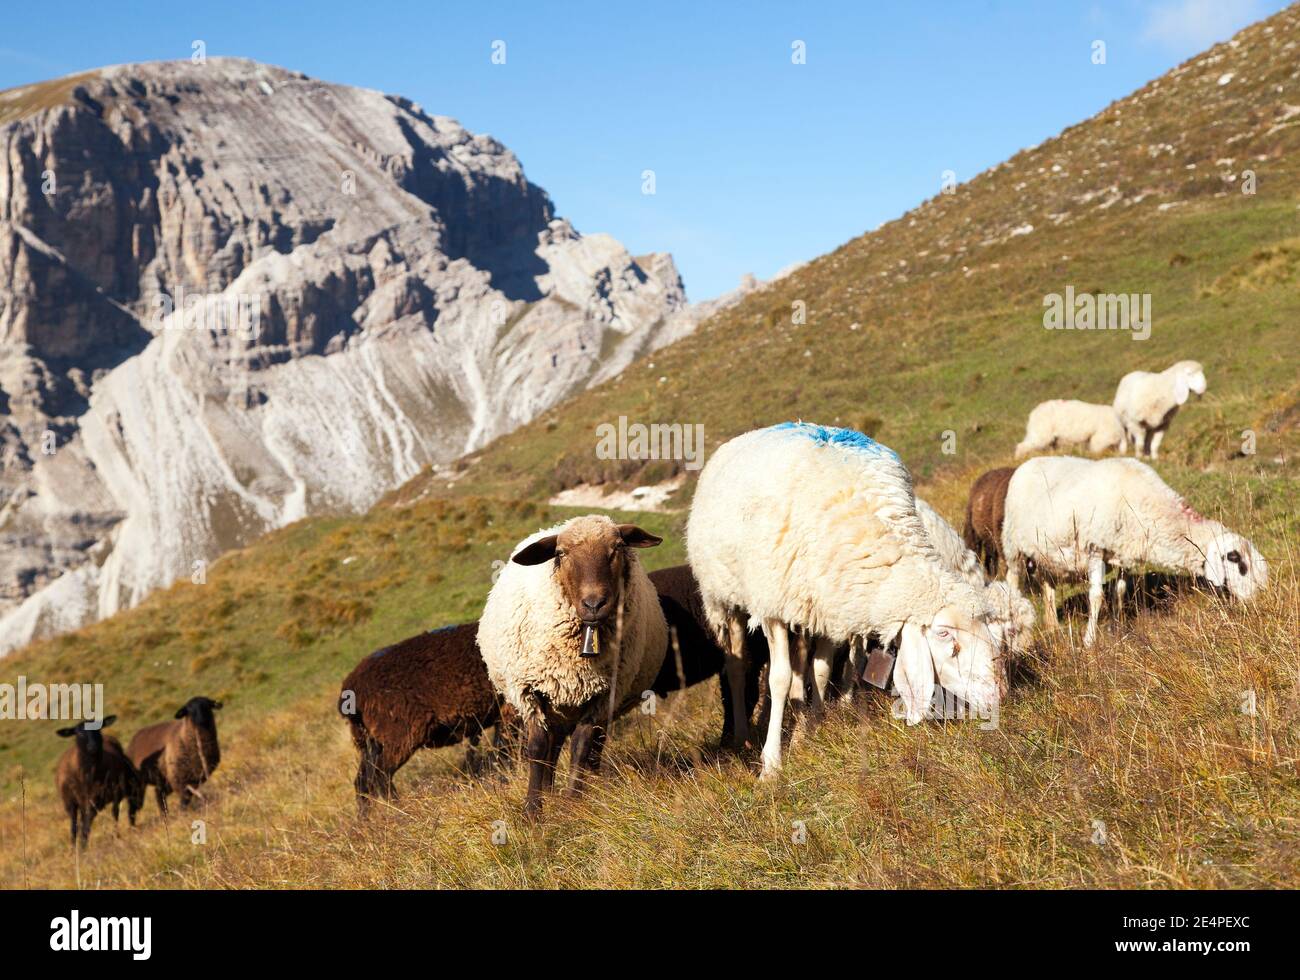 herd of sheep in alps dolomites mountains, ovis aries, sheep is typical farm animal on mountains Stock Photo